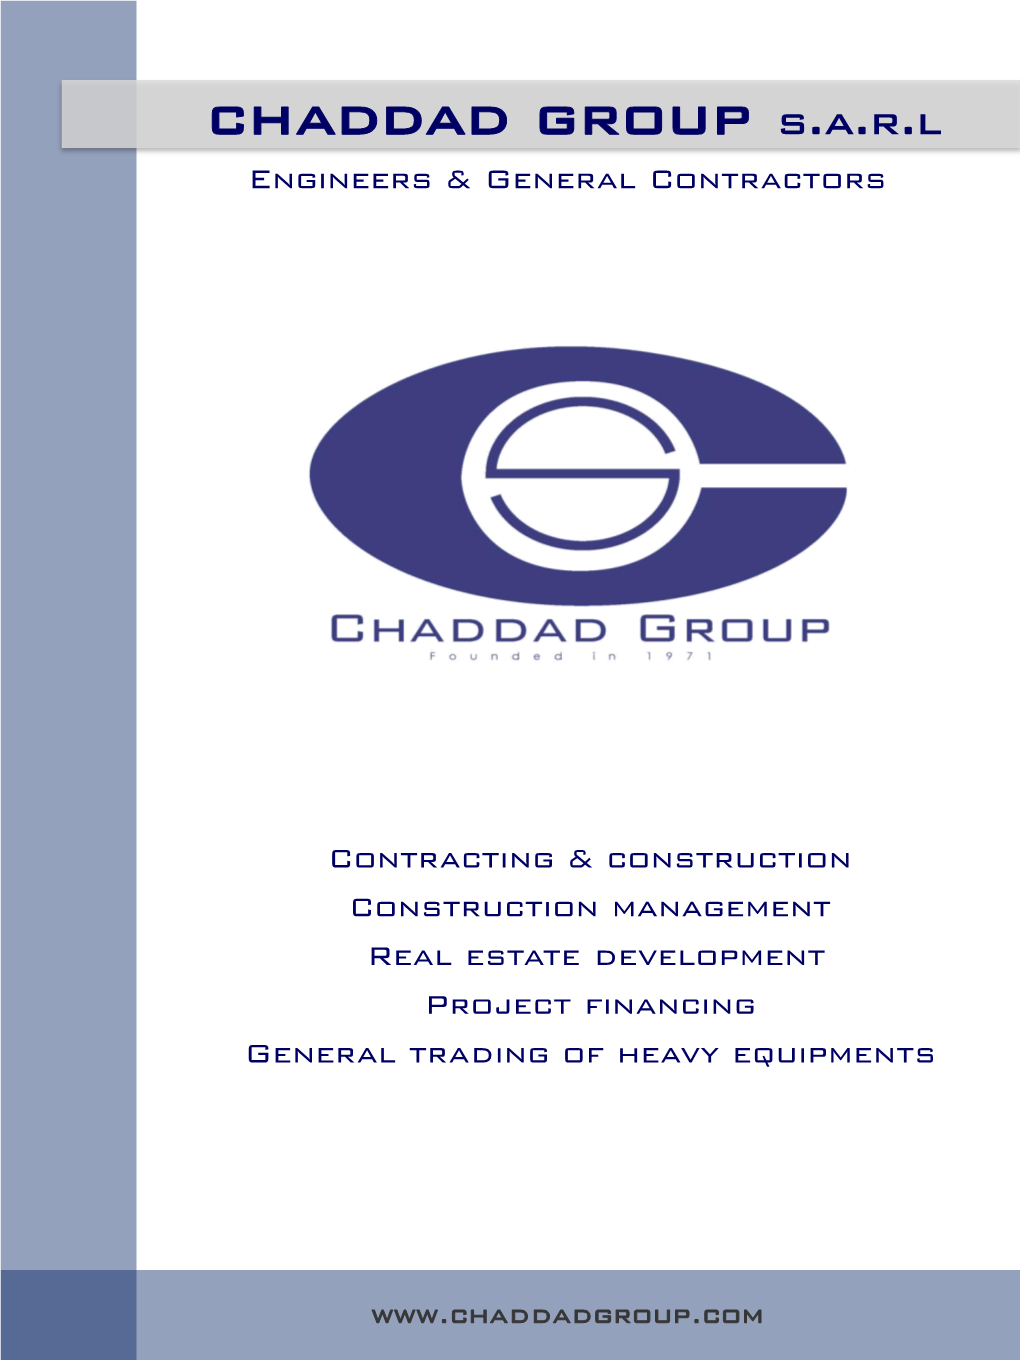 Chaddad Group S.A.R.L Engineers & General Contractors